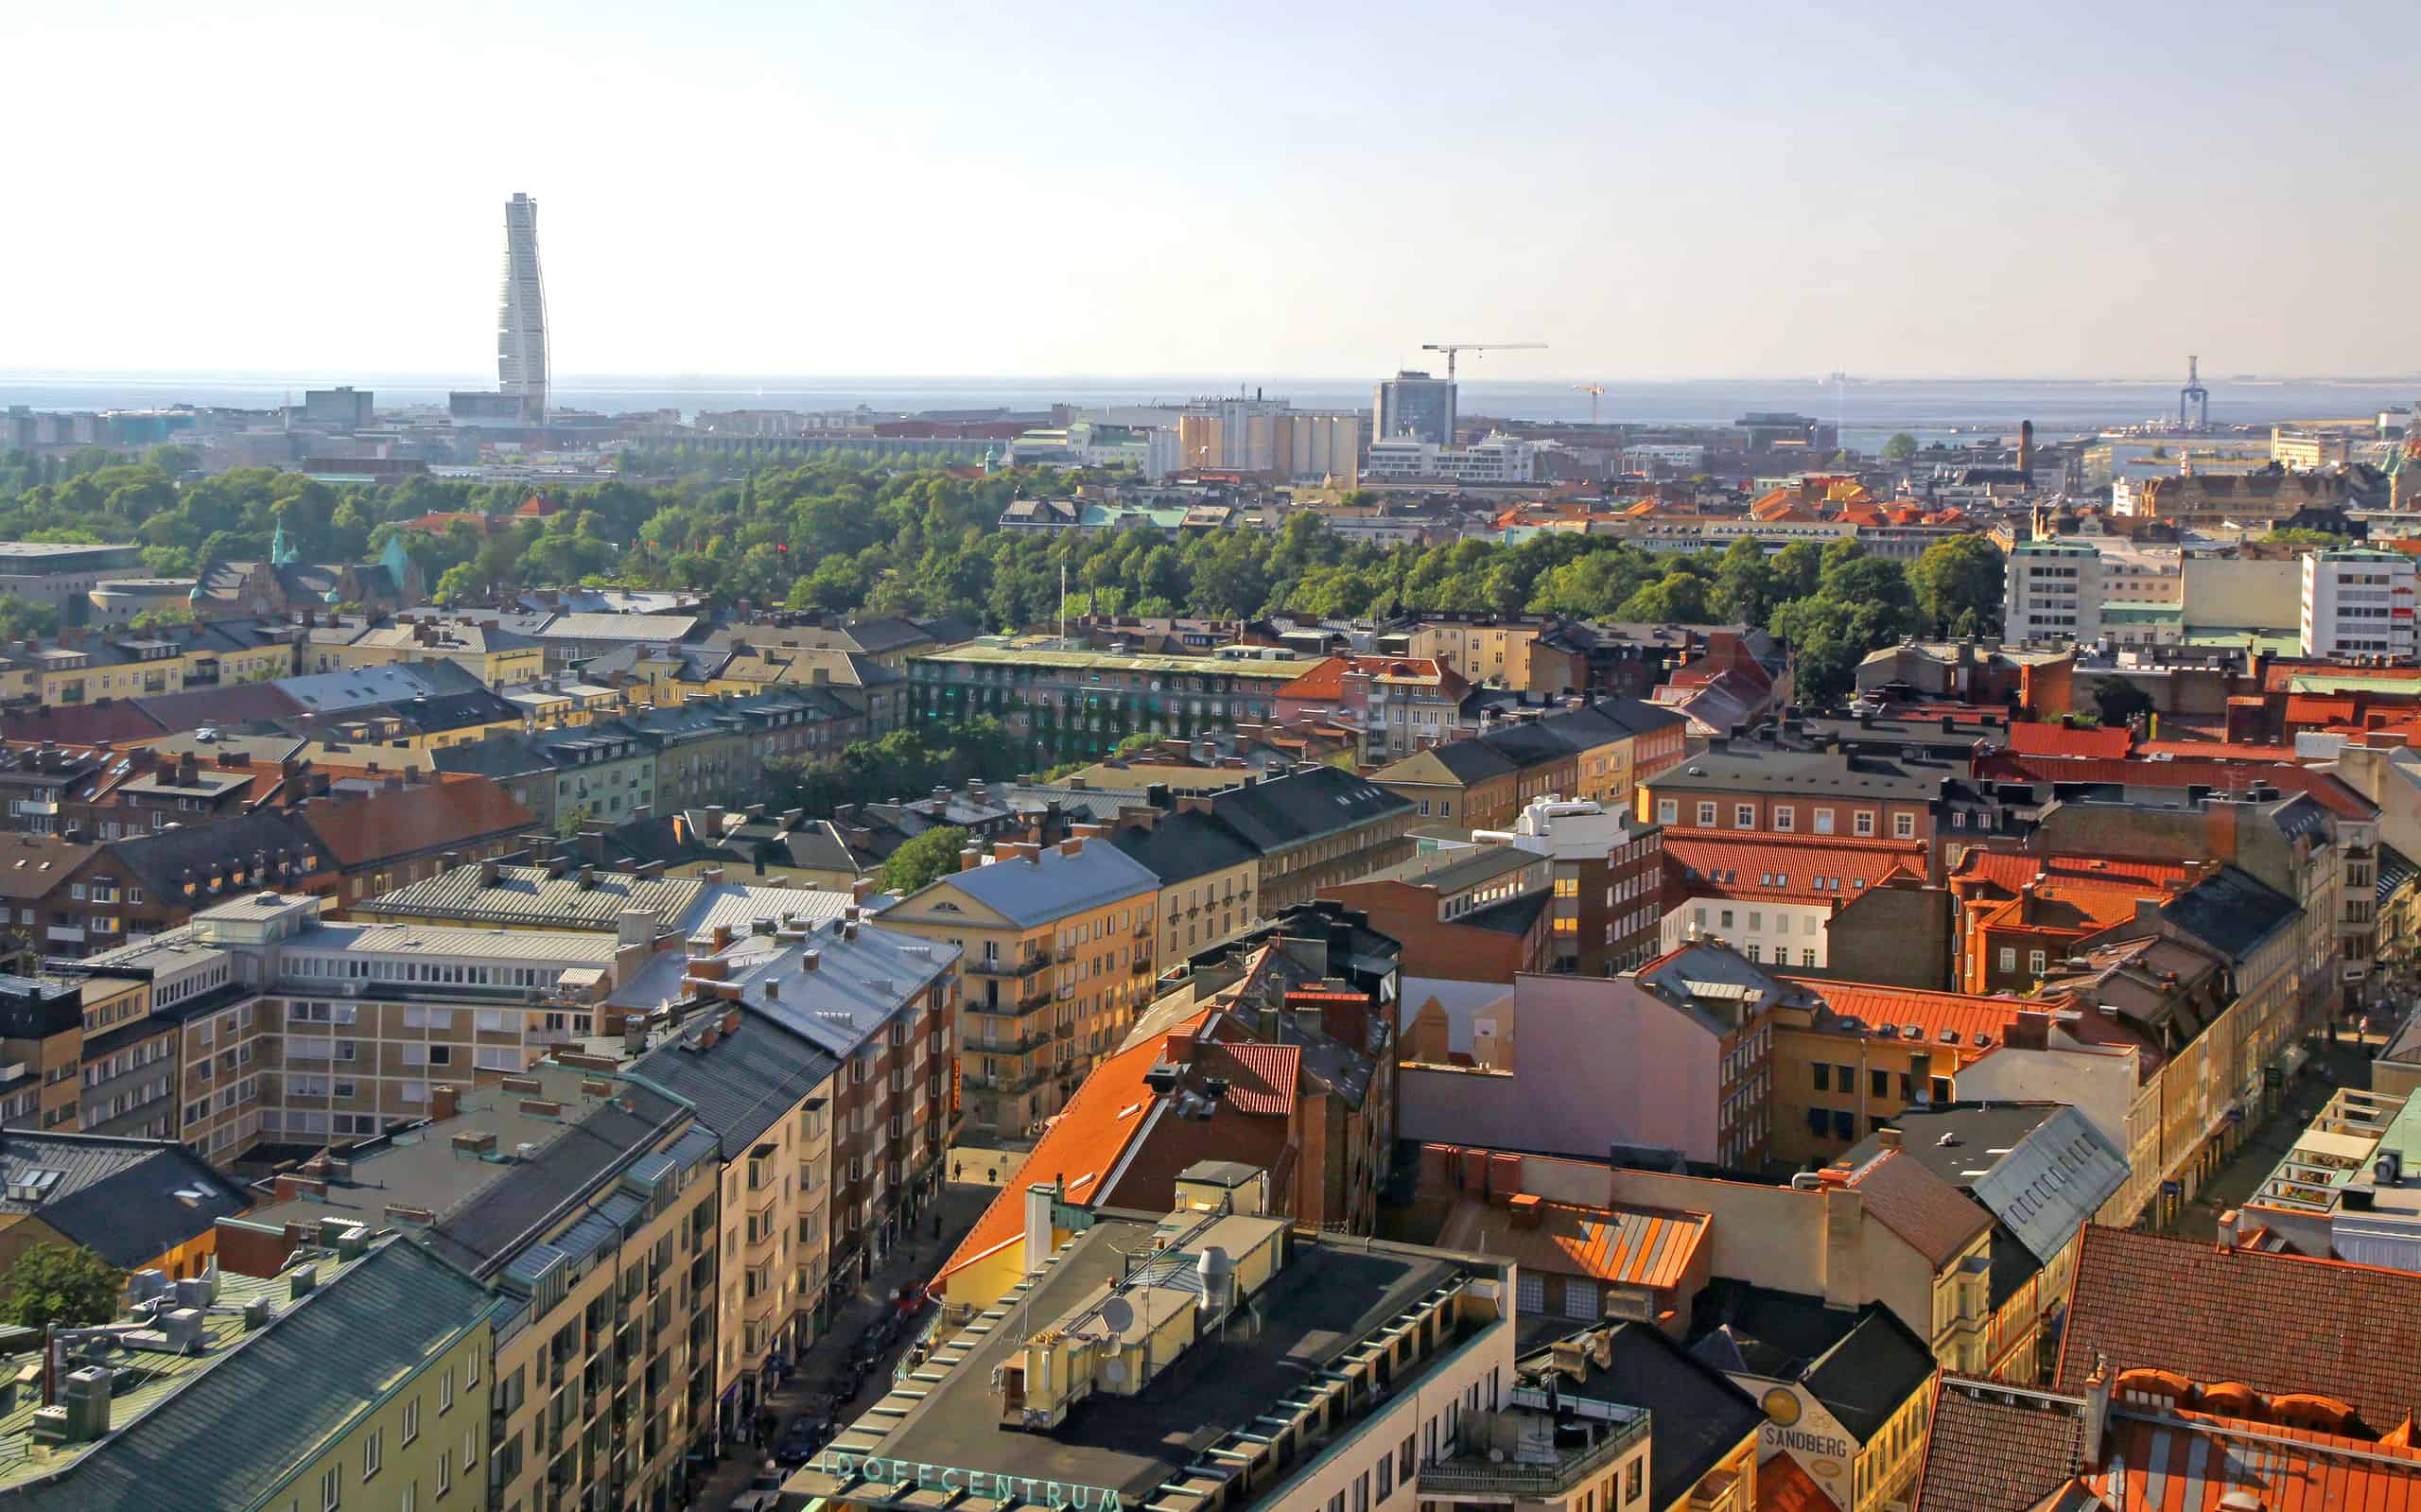 Aerial view of Malmo city, Sweden